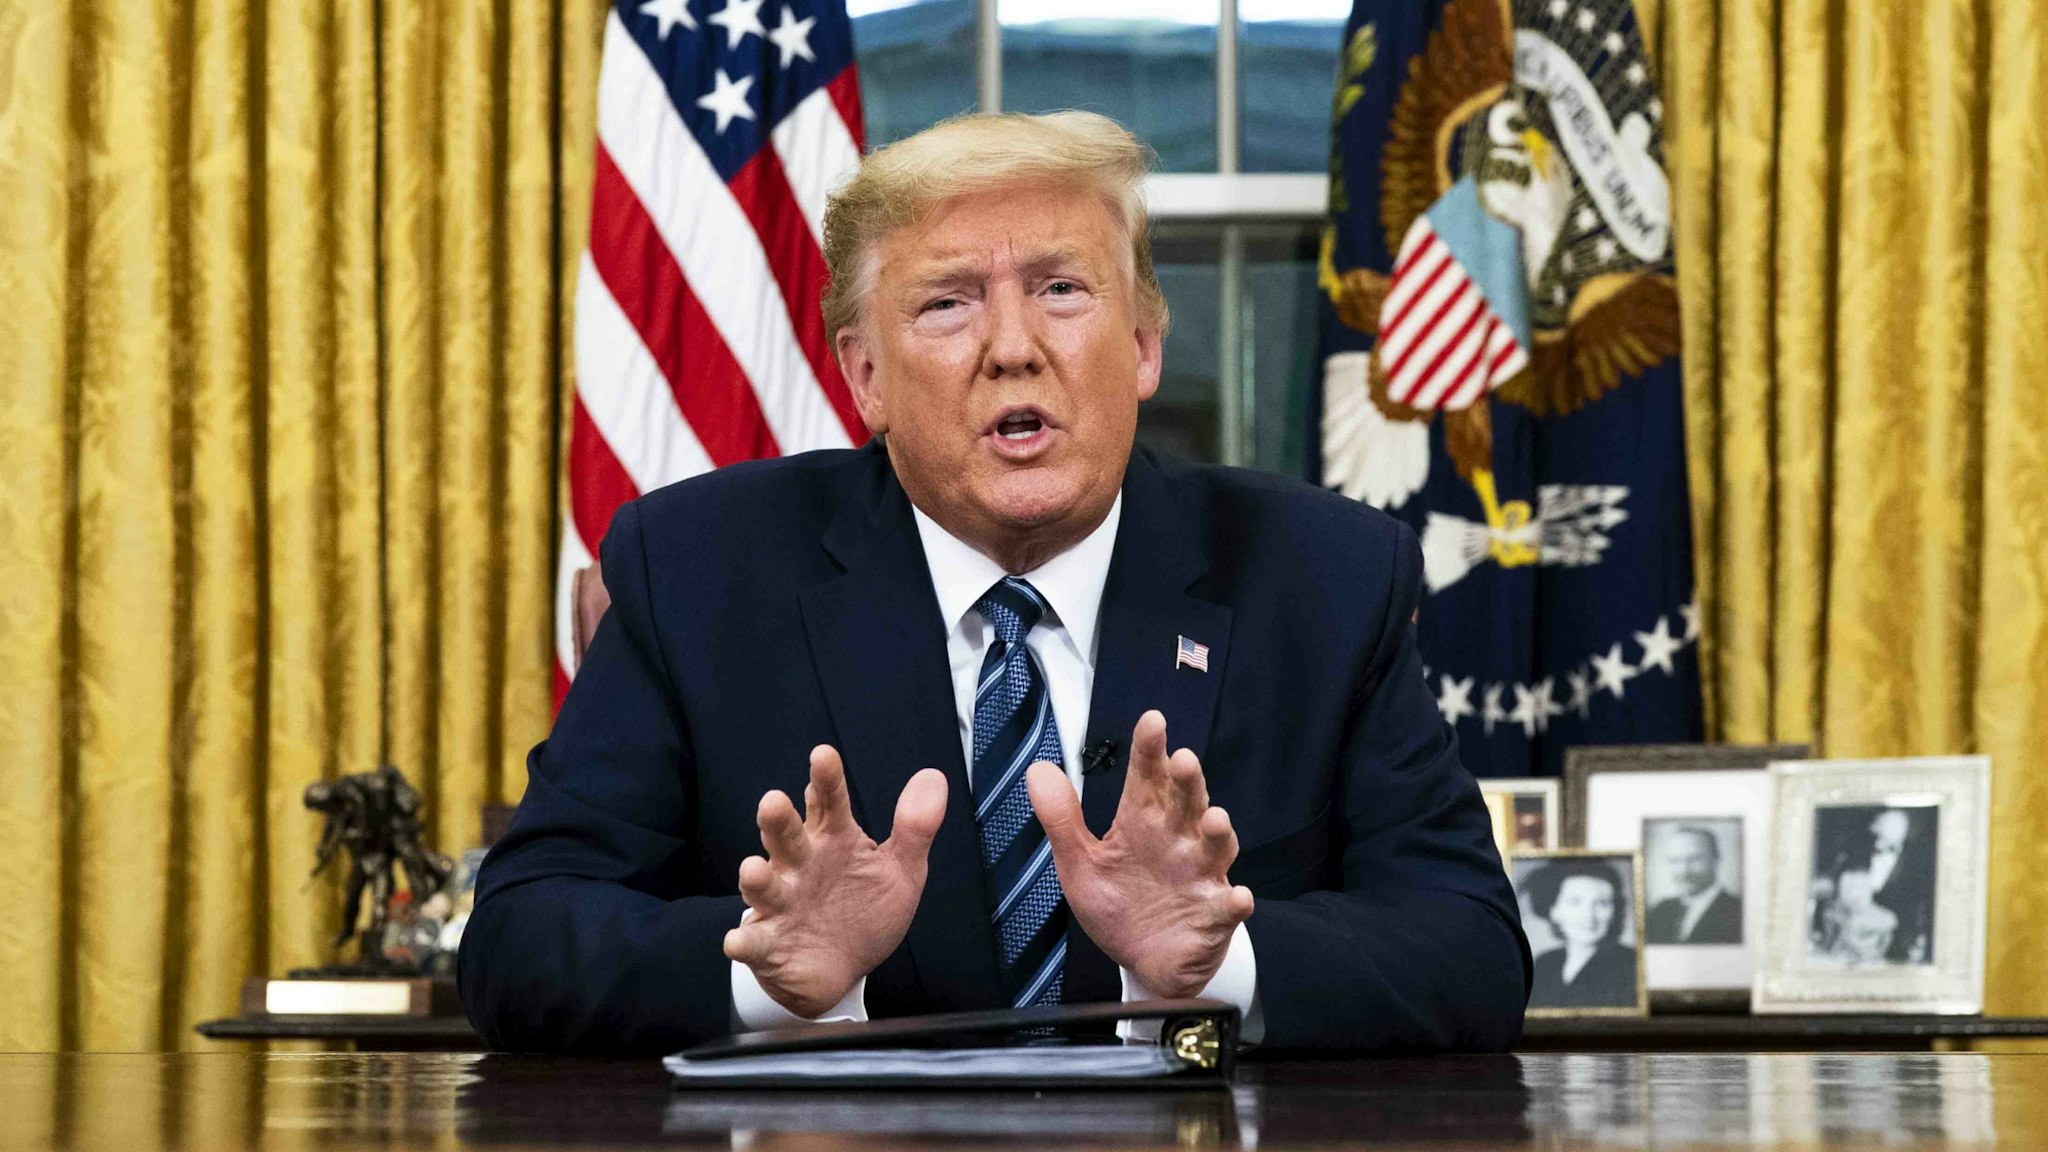 WASHINGTON, DC - MARCH 11: US President Donald Trump addresses the nation from the Oval Office about the widening Coronavirus crisis on March 11, 2020 in Washington, DC. President Trump said the US will suspend all travel from Europe - except the UK - for the next 30 days. Since December 2019, Coronavirus (COVID-19) has infected more than 109,000 people and killed more than 3,800 people in 105 countries. (Photo by Doug Mills-Pool/Getty Images)